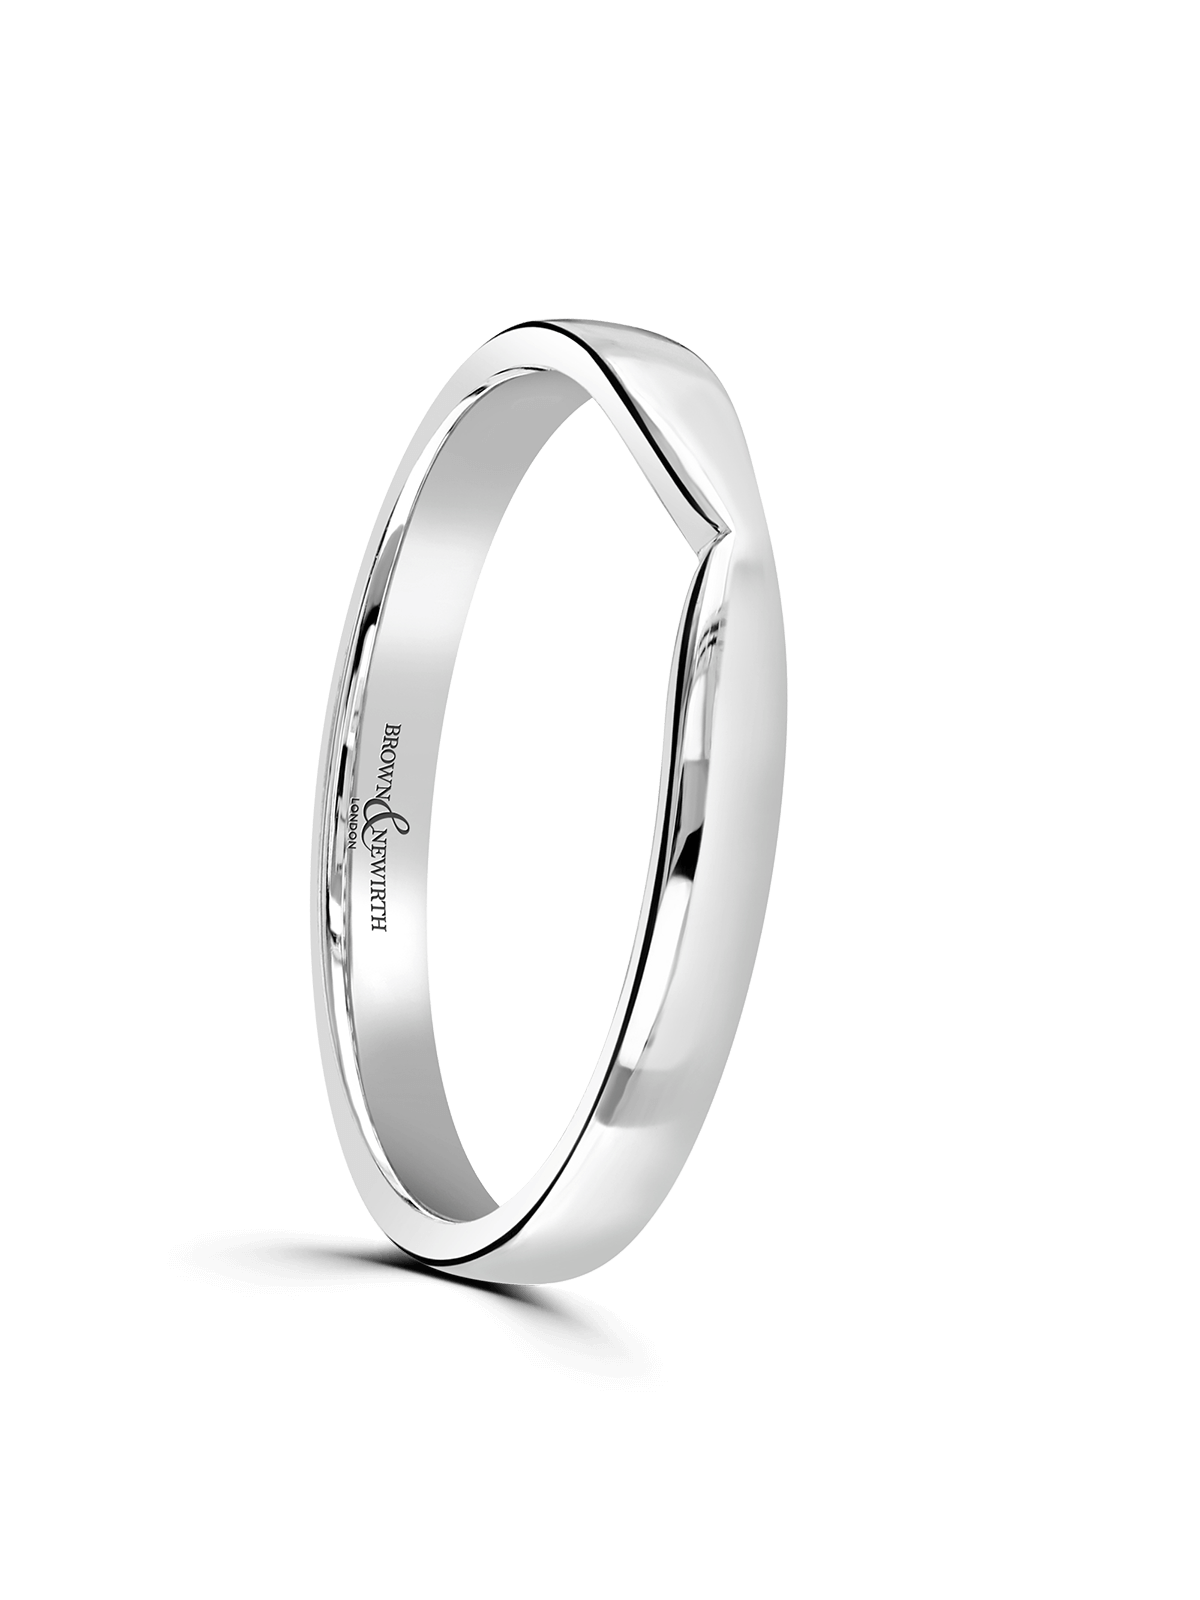 Brown & Newirth Ornament Wedding Ring in 9ct White Gold